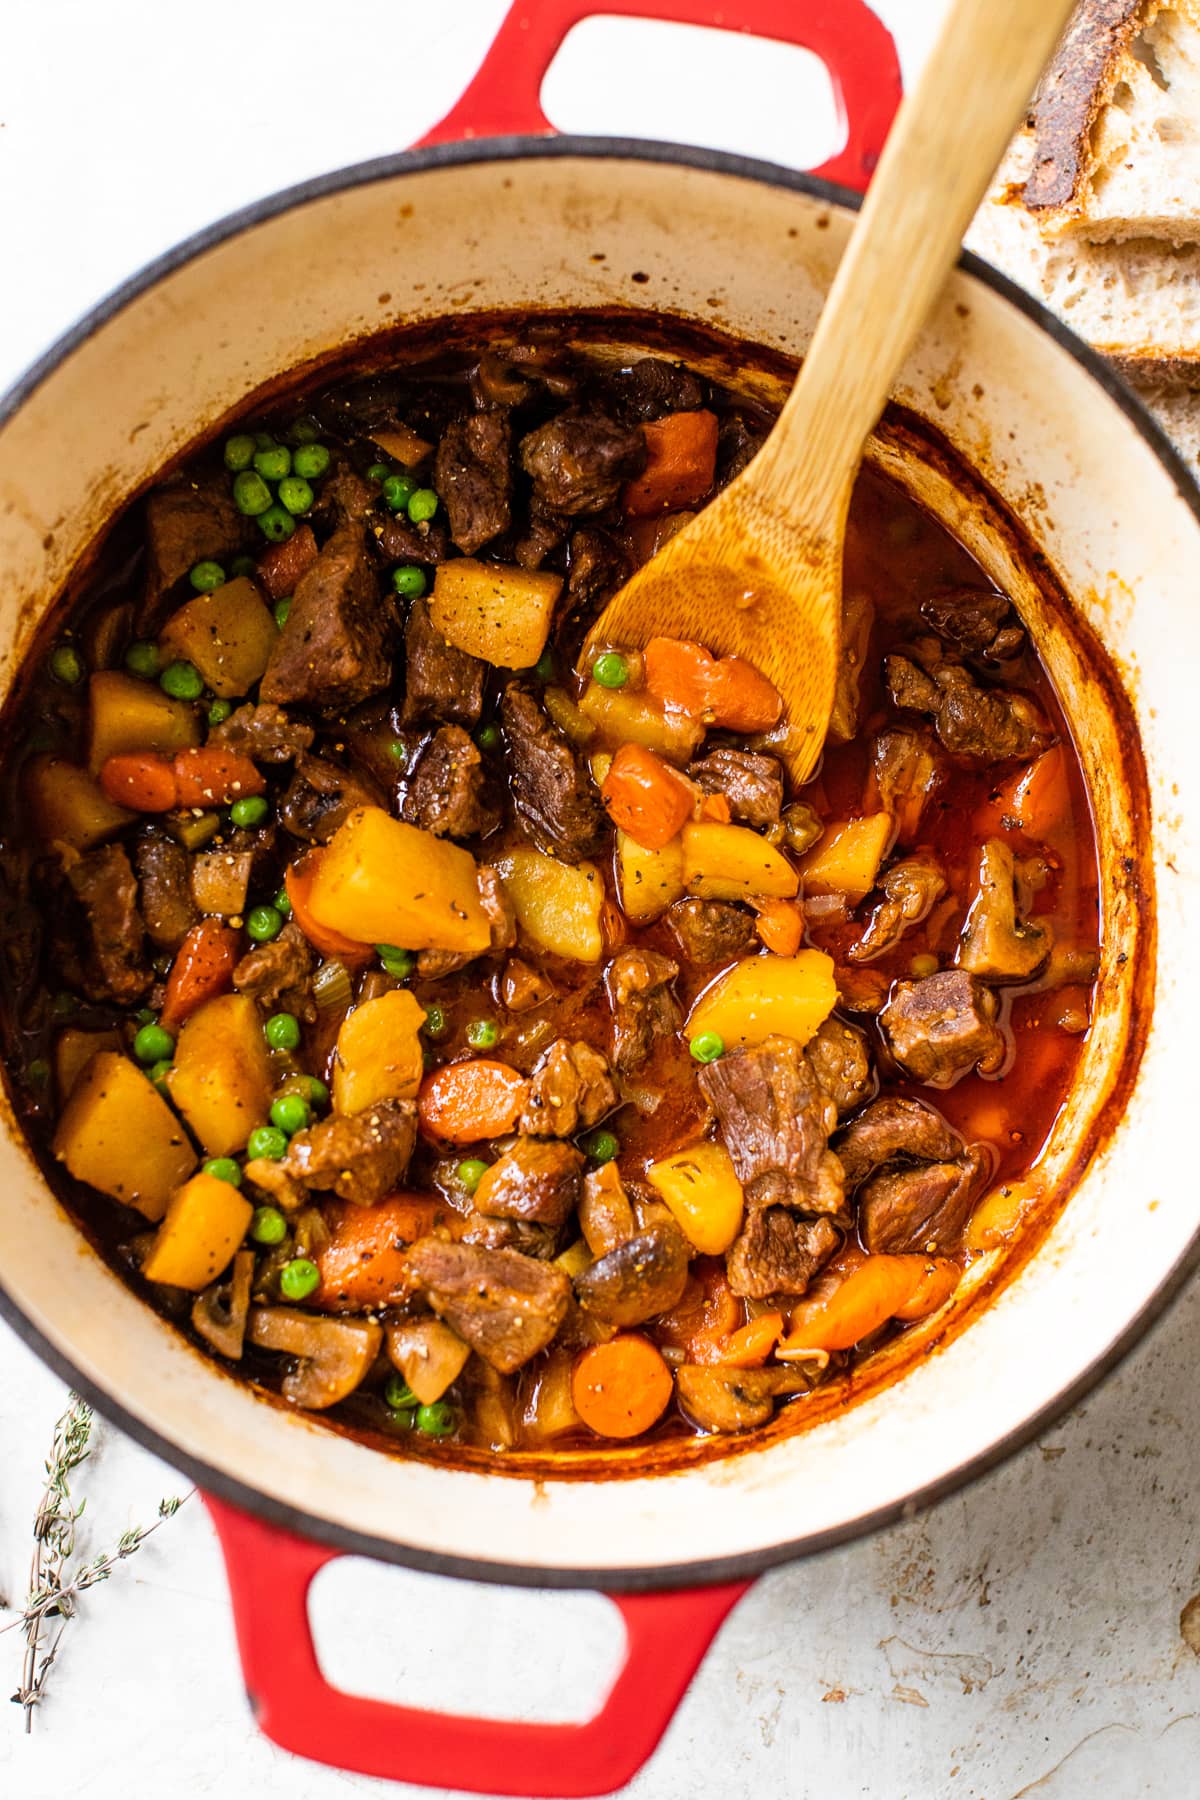 Classic beef stew in a pot.